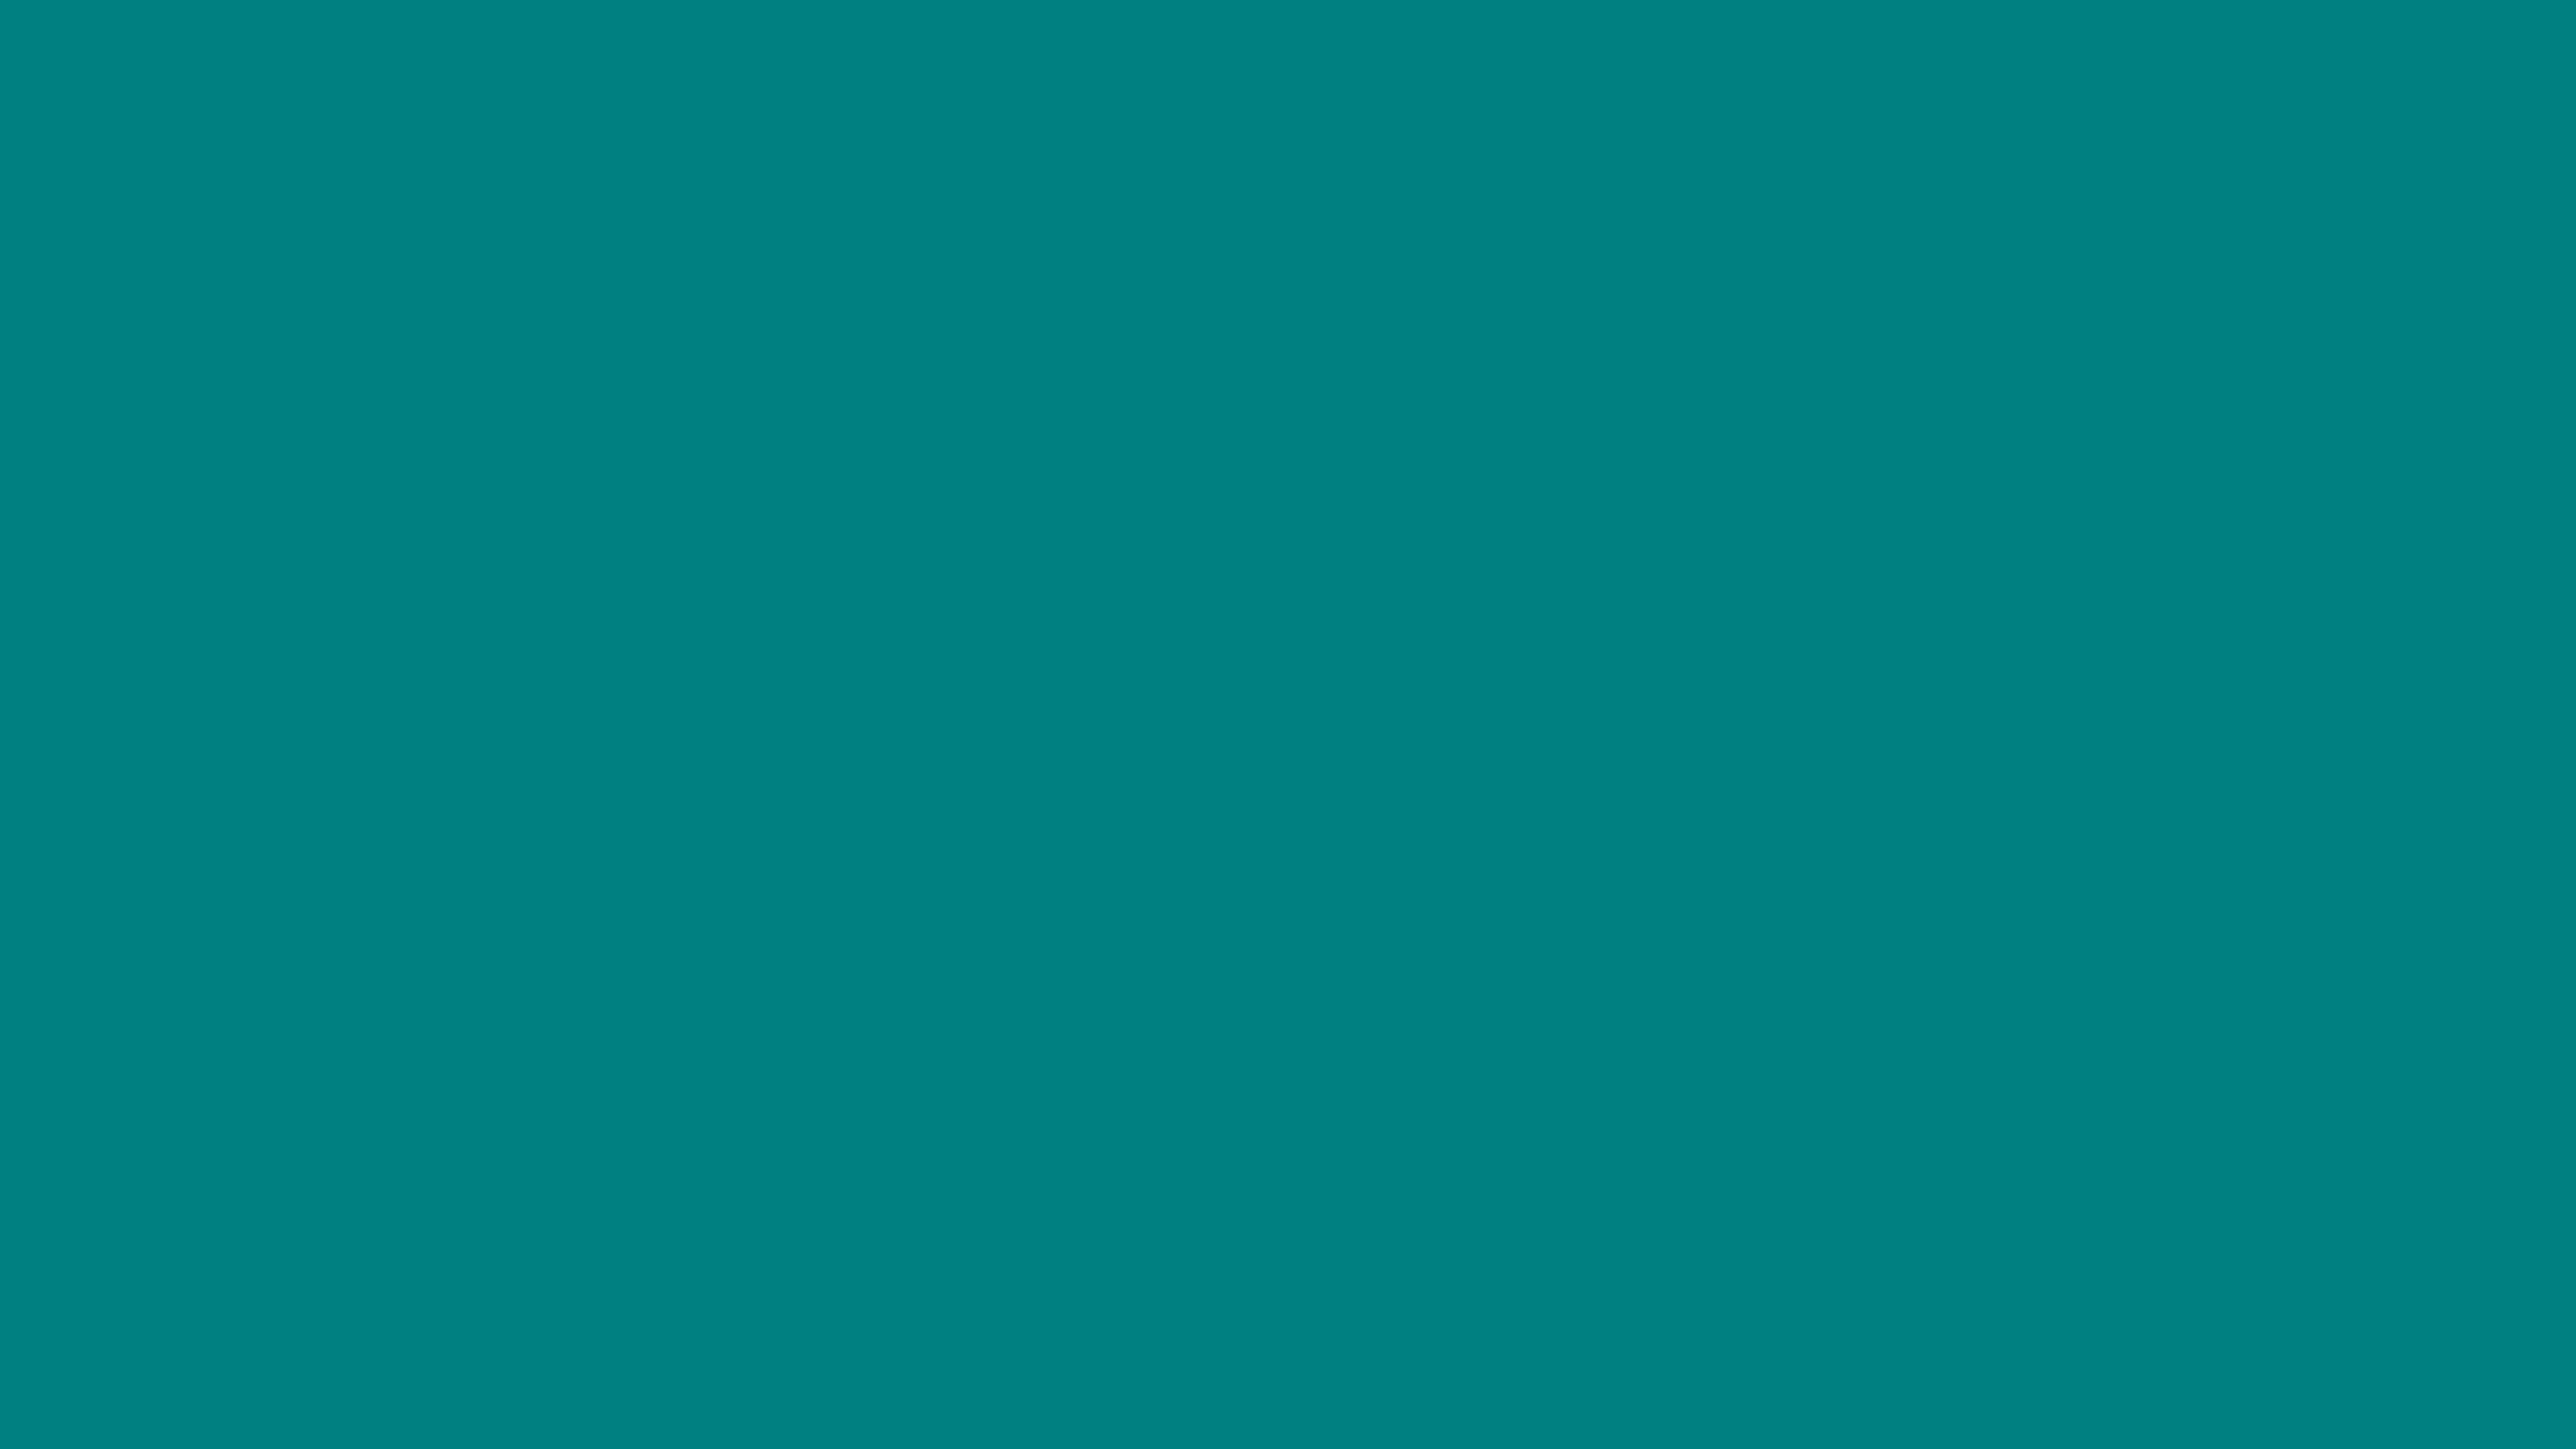 4096x2304 Teal Solid Color Background